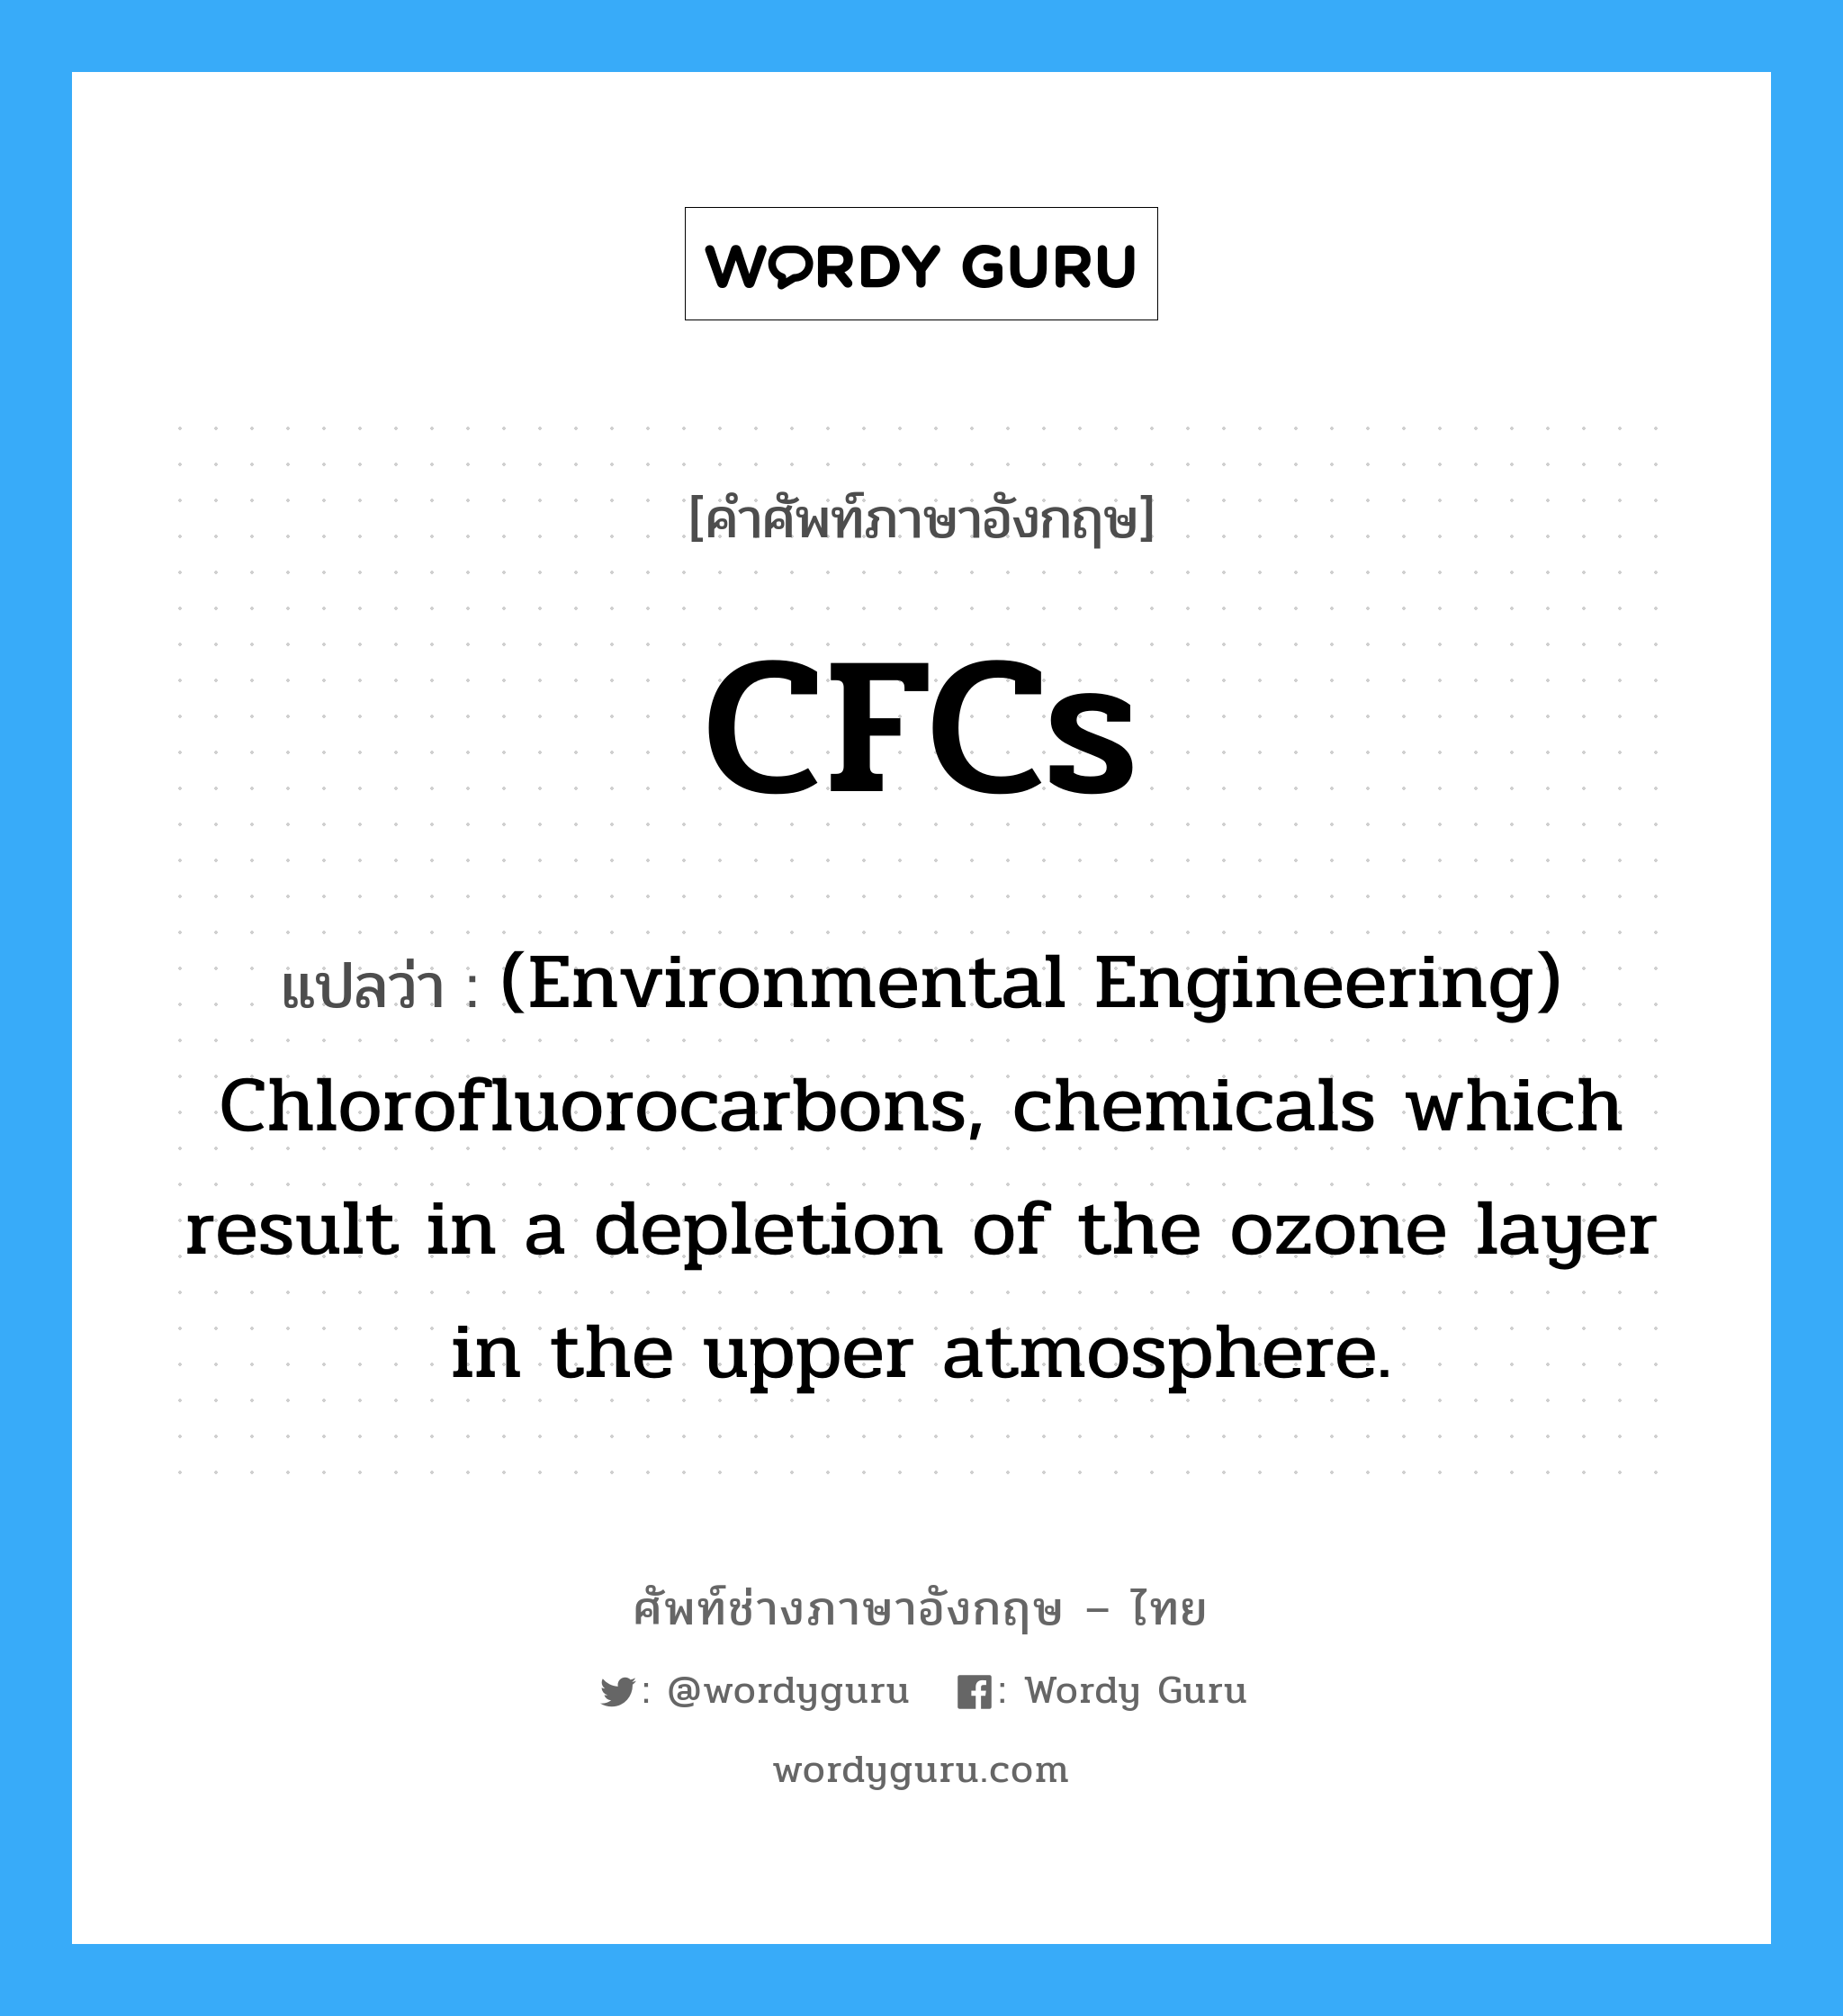 CFCs แปลว่า?, คำศัพท์ช่างภาษาอังกฤษ - ไทย CFCs คำศัพท์ภาษาอังกฤษ CFCs แปลว่า (Environmental Engineering) Chlorofluorocarbons, chemicals which result in a depletion of the ozone layer in the upper atmosphere.